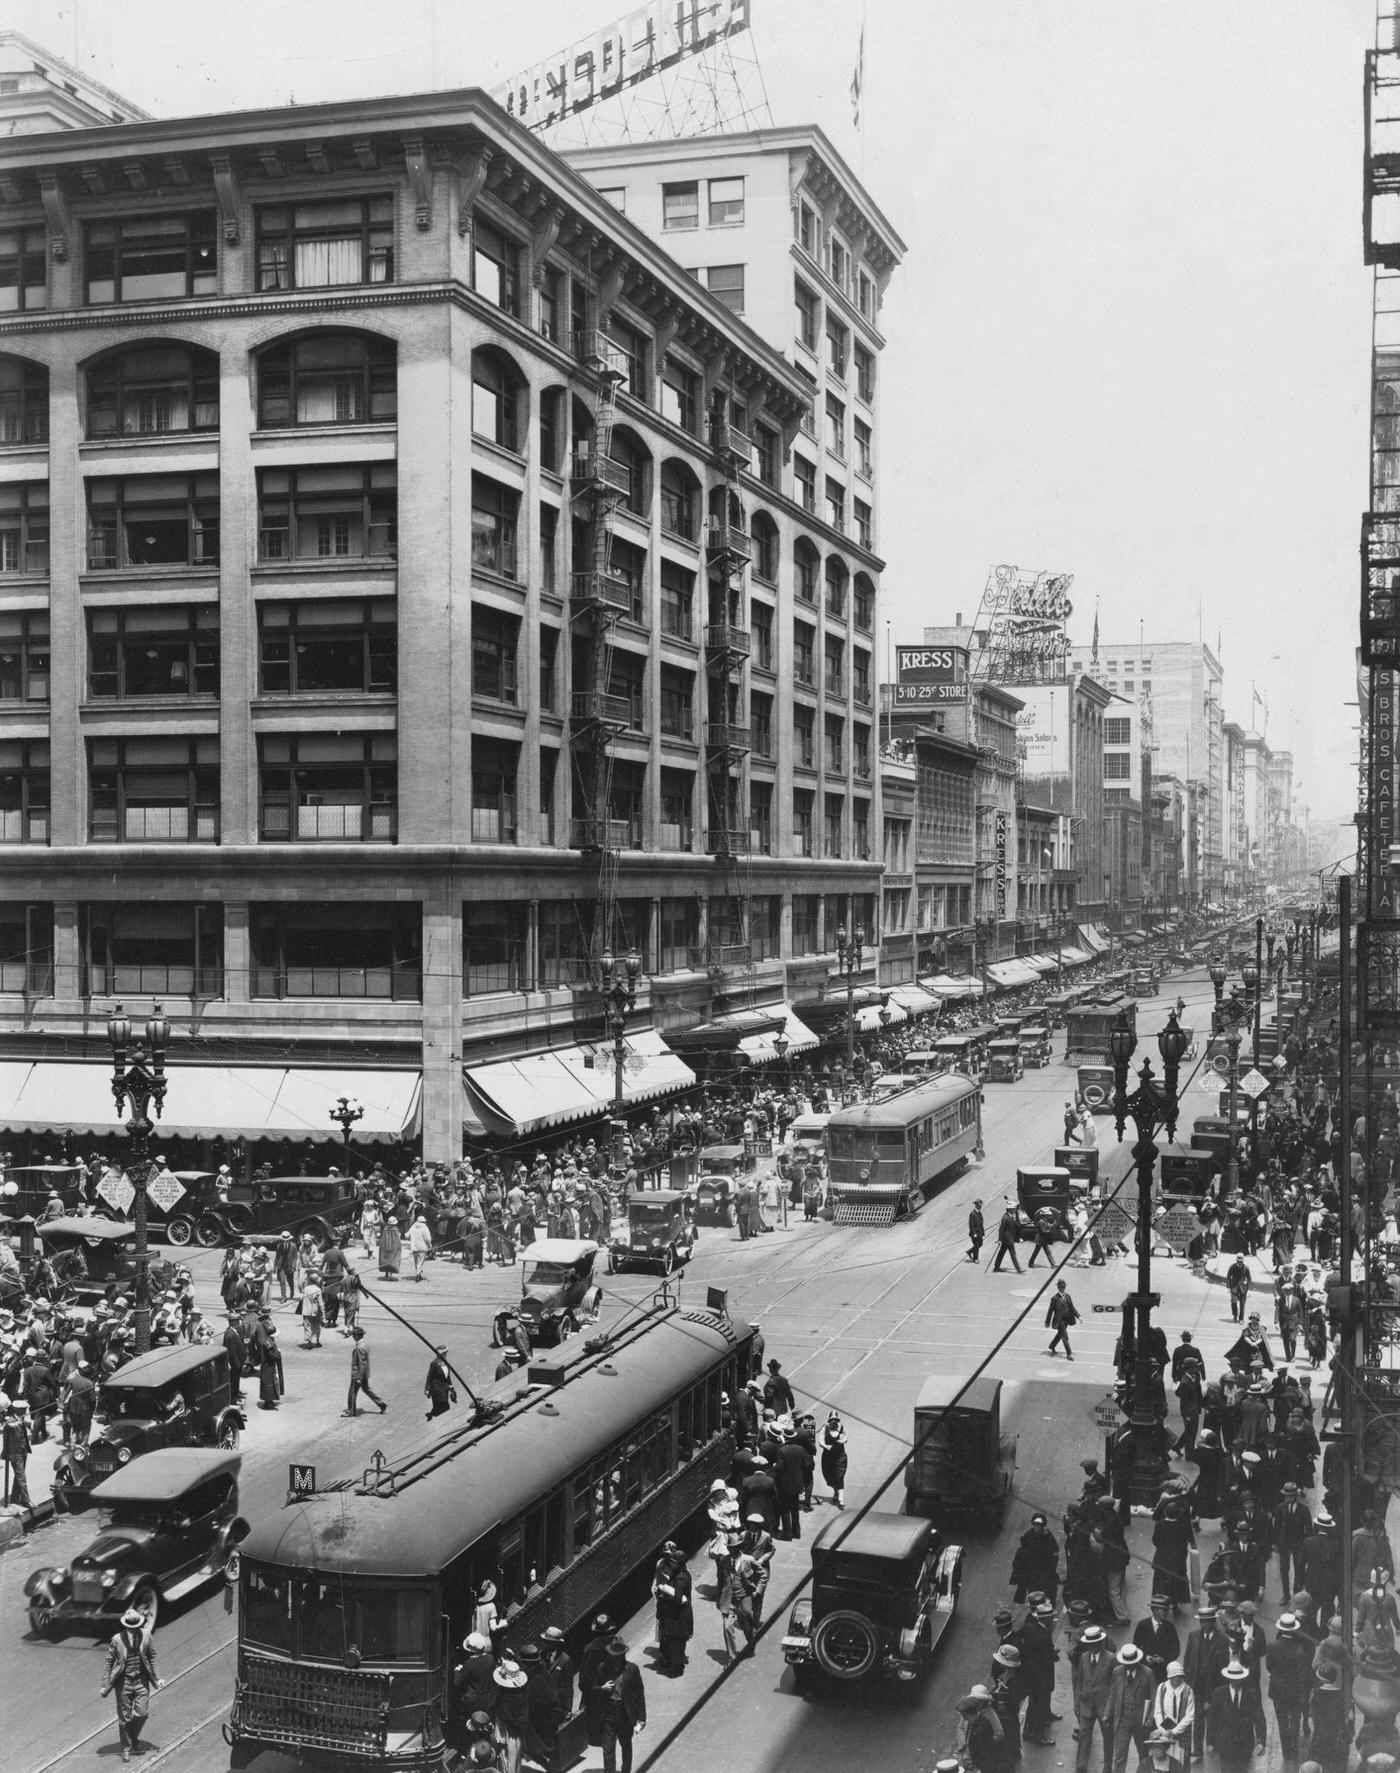 A view, looking north from Seventh Street, of crowds on Broadway, Los Angeles, California, 1930.